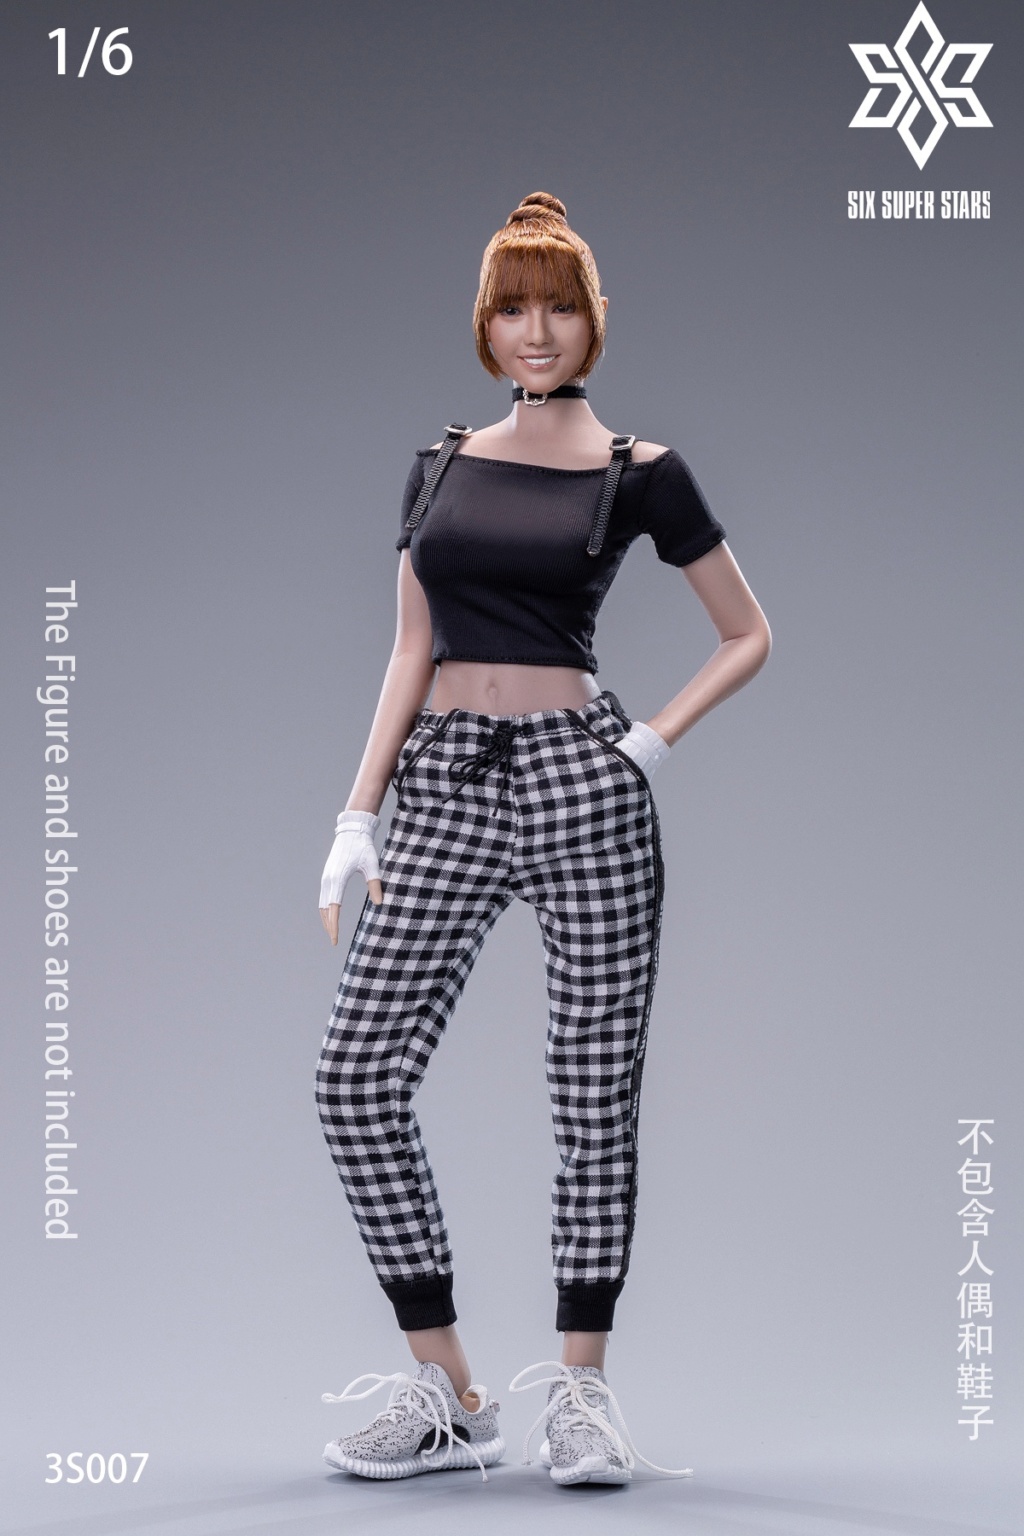 SixSuperStar - NEW PRODUCT: Six Super Star: 1/6 cool girl skirt suit/check pants/functional suit female soldier costume 14464710